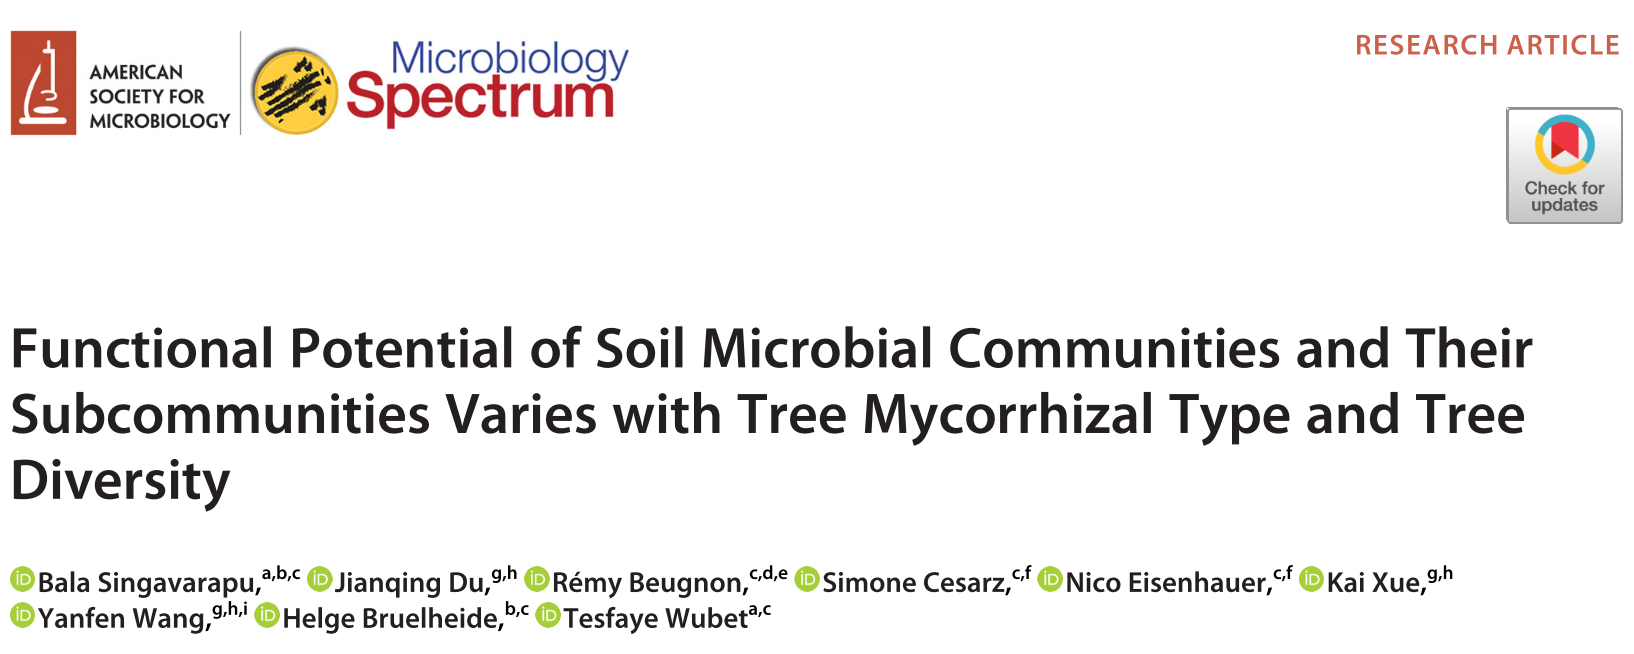 Functional potential of soil microbial communities and their subcommunities varies with tree mycorrhizal type and tree diversity